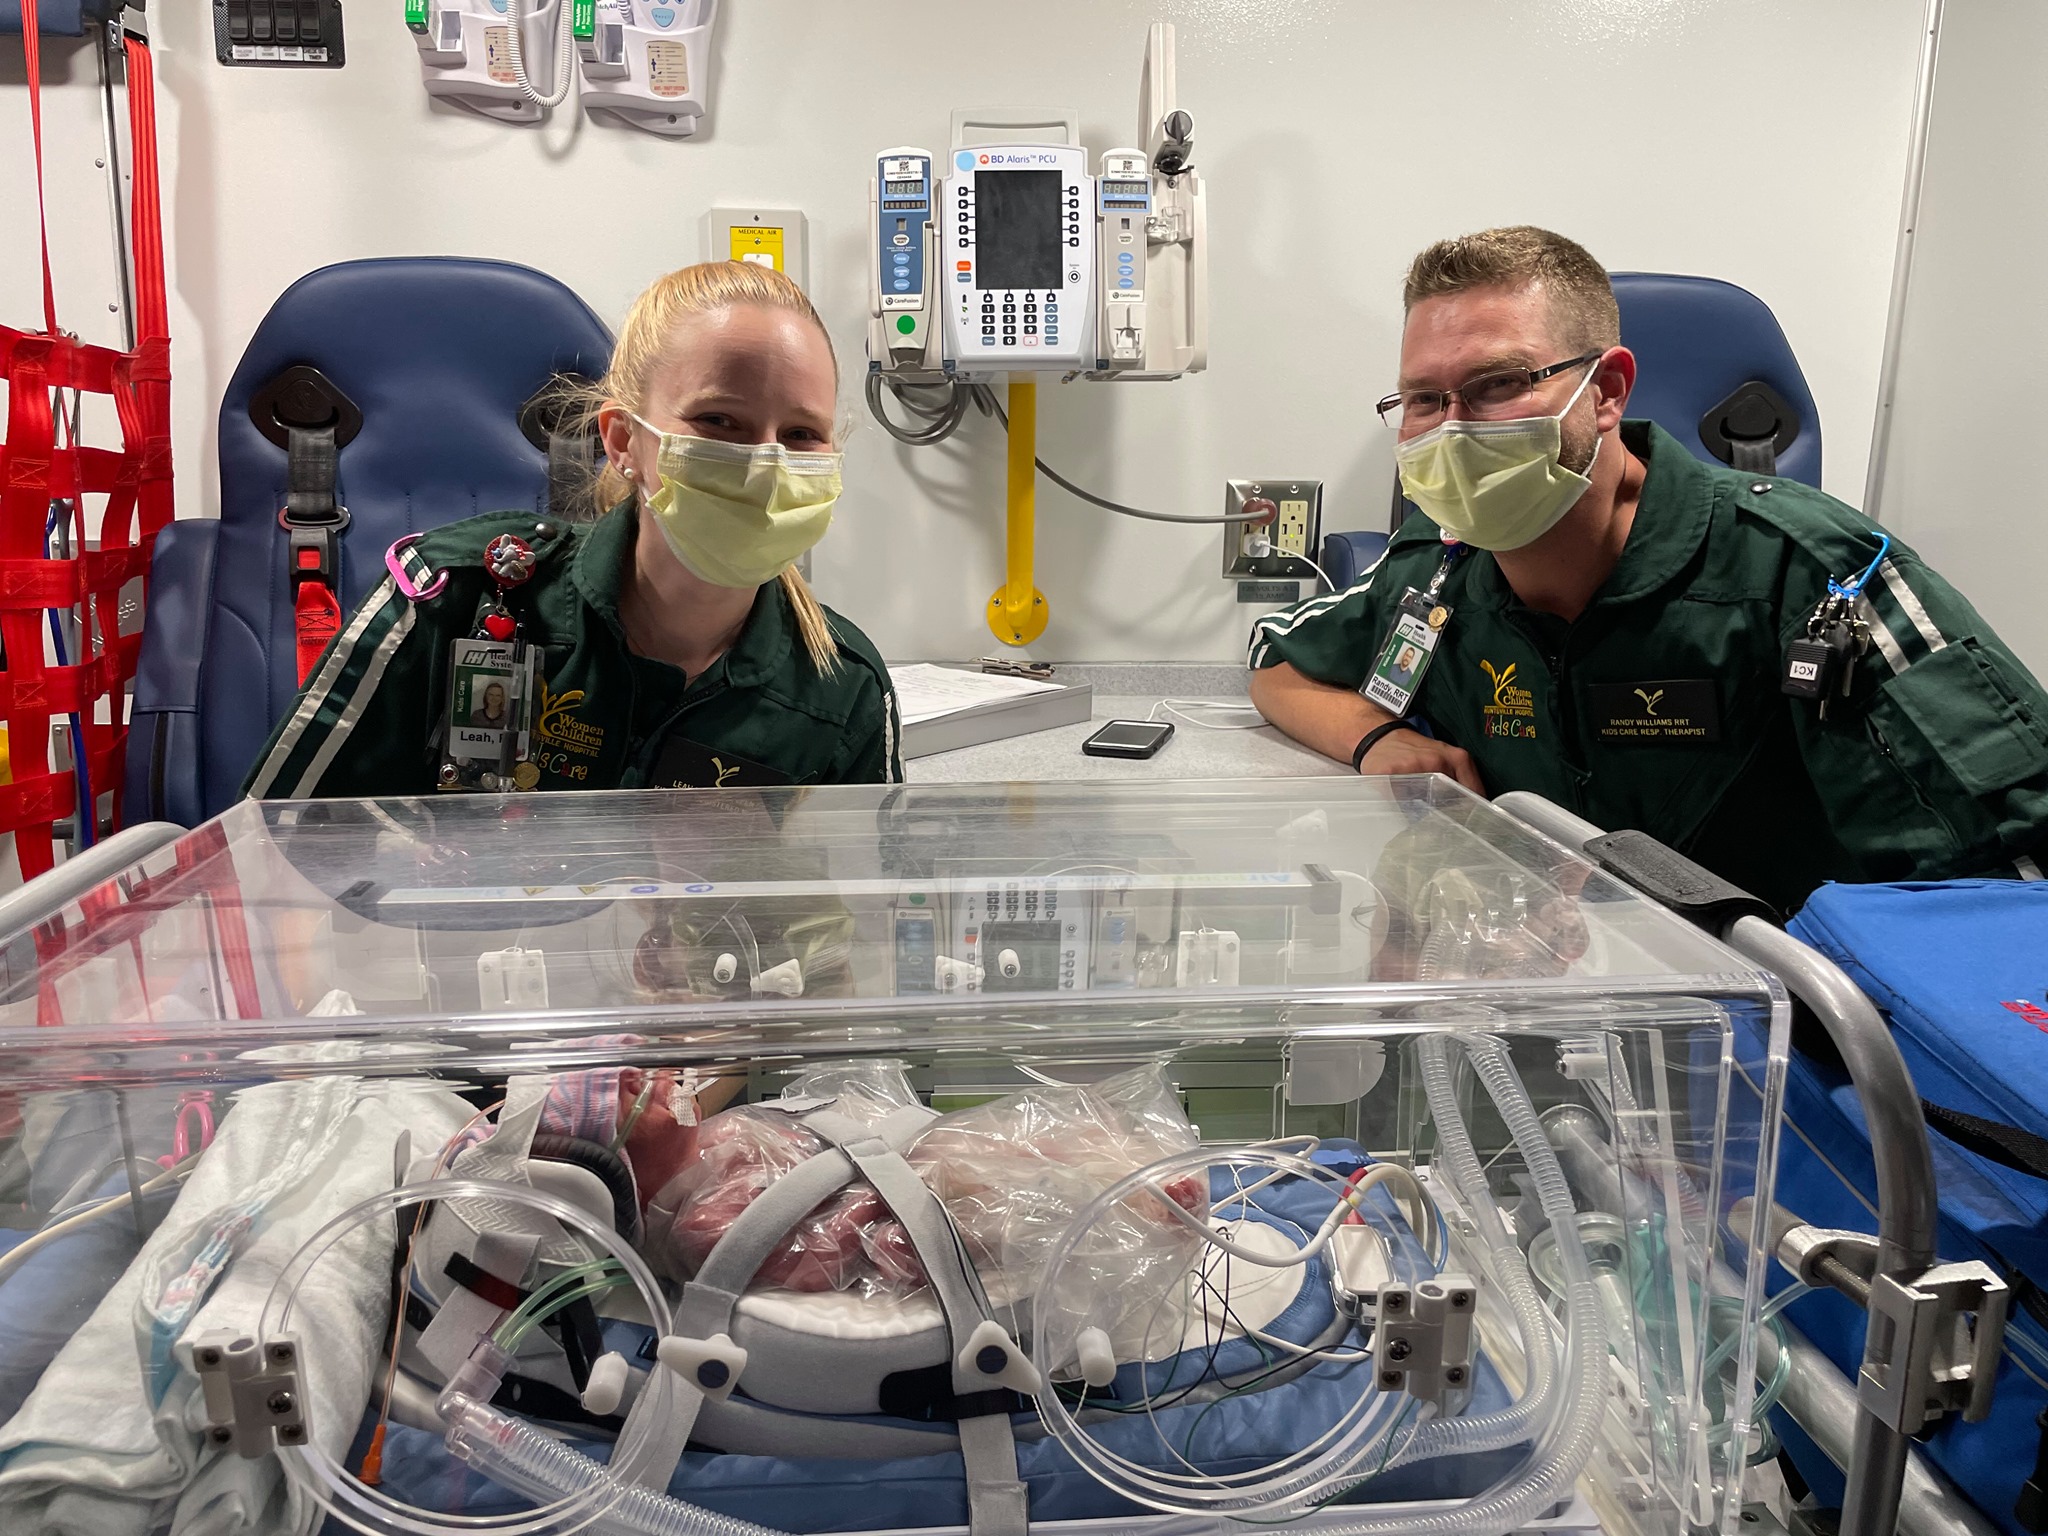 New State-of-the-Art Kids Care Pediatric and Neonatal Transport Ambulance Now Serving Infants, Children Across the Region